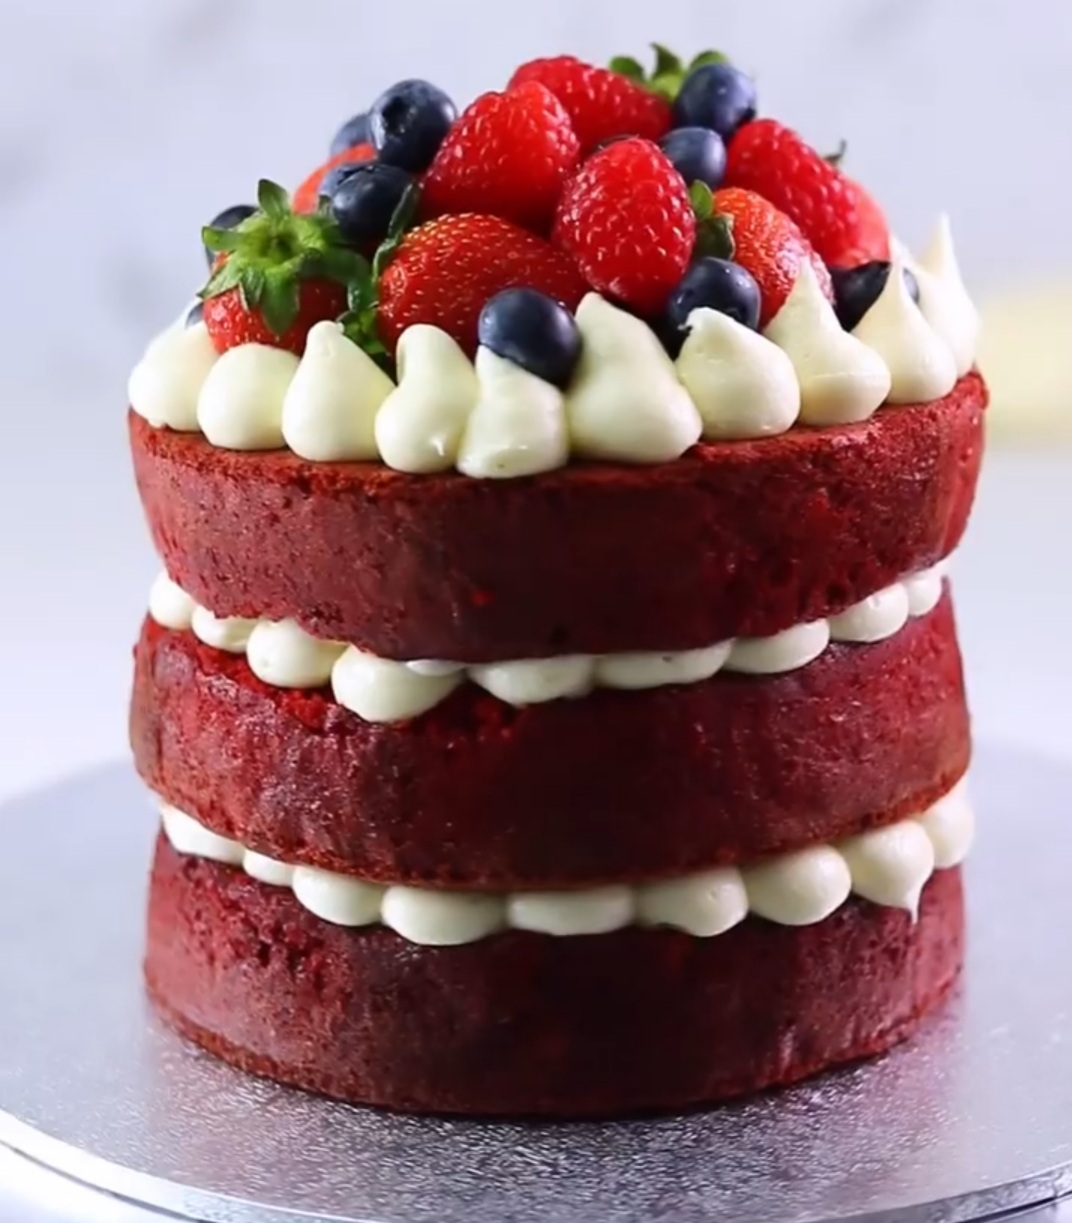 How to make a REAL Red Velvet Cake from scratch - YouTube